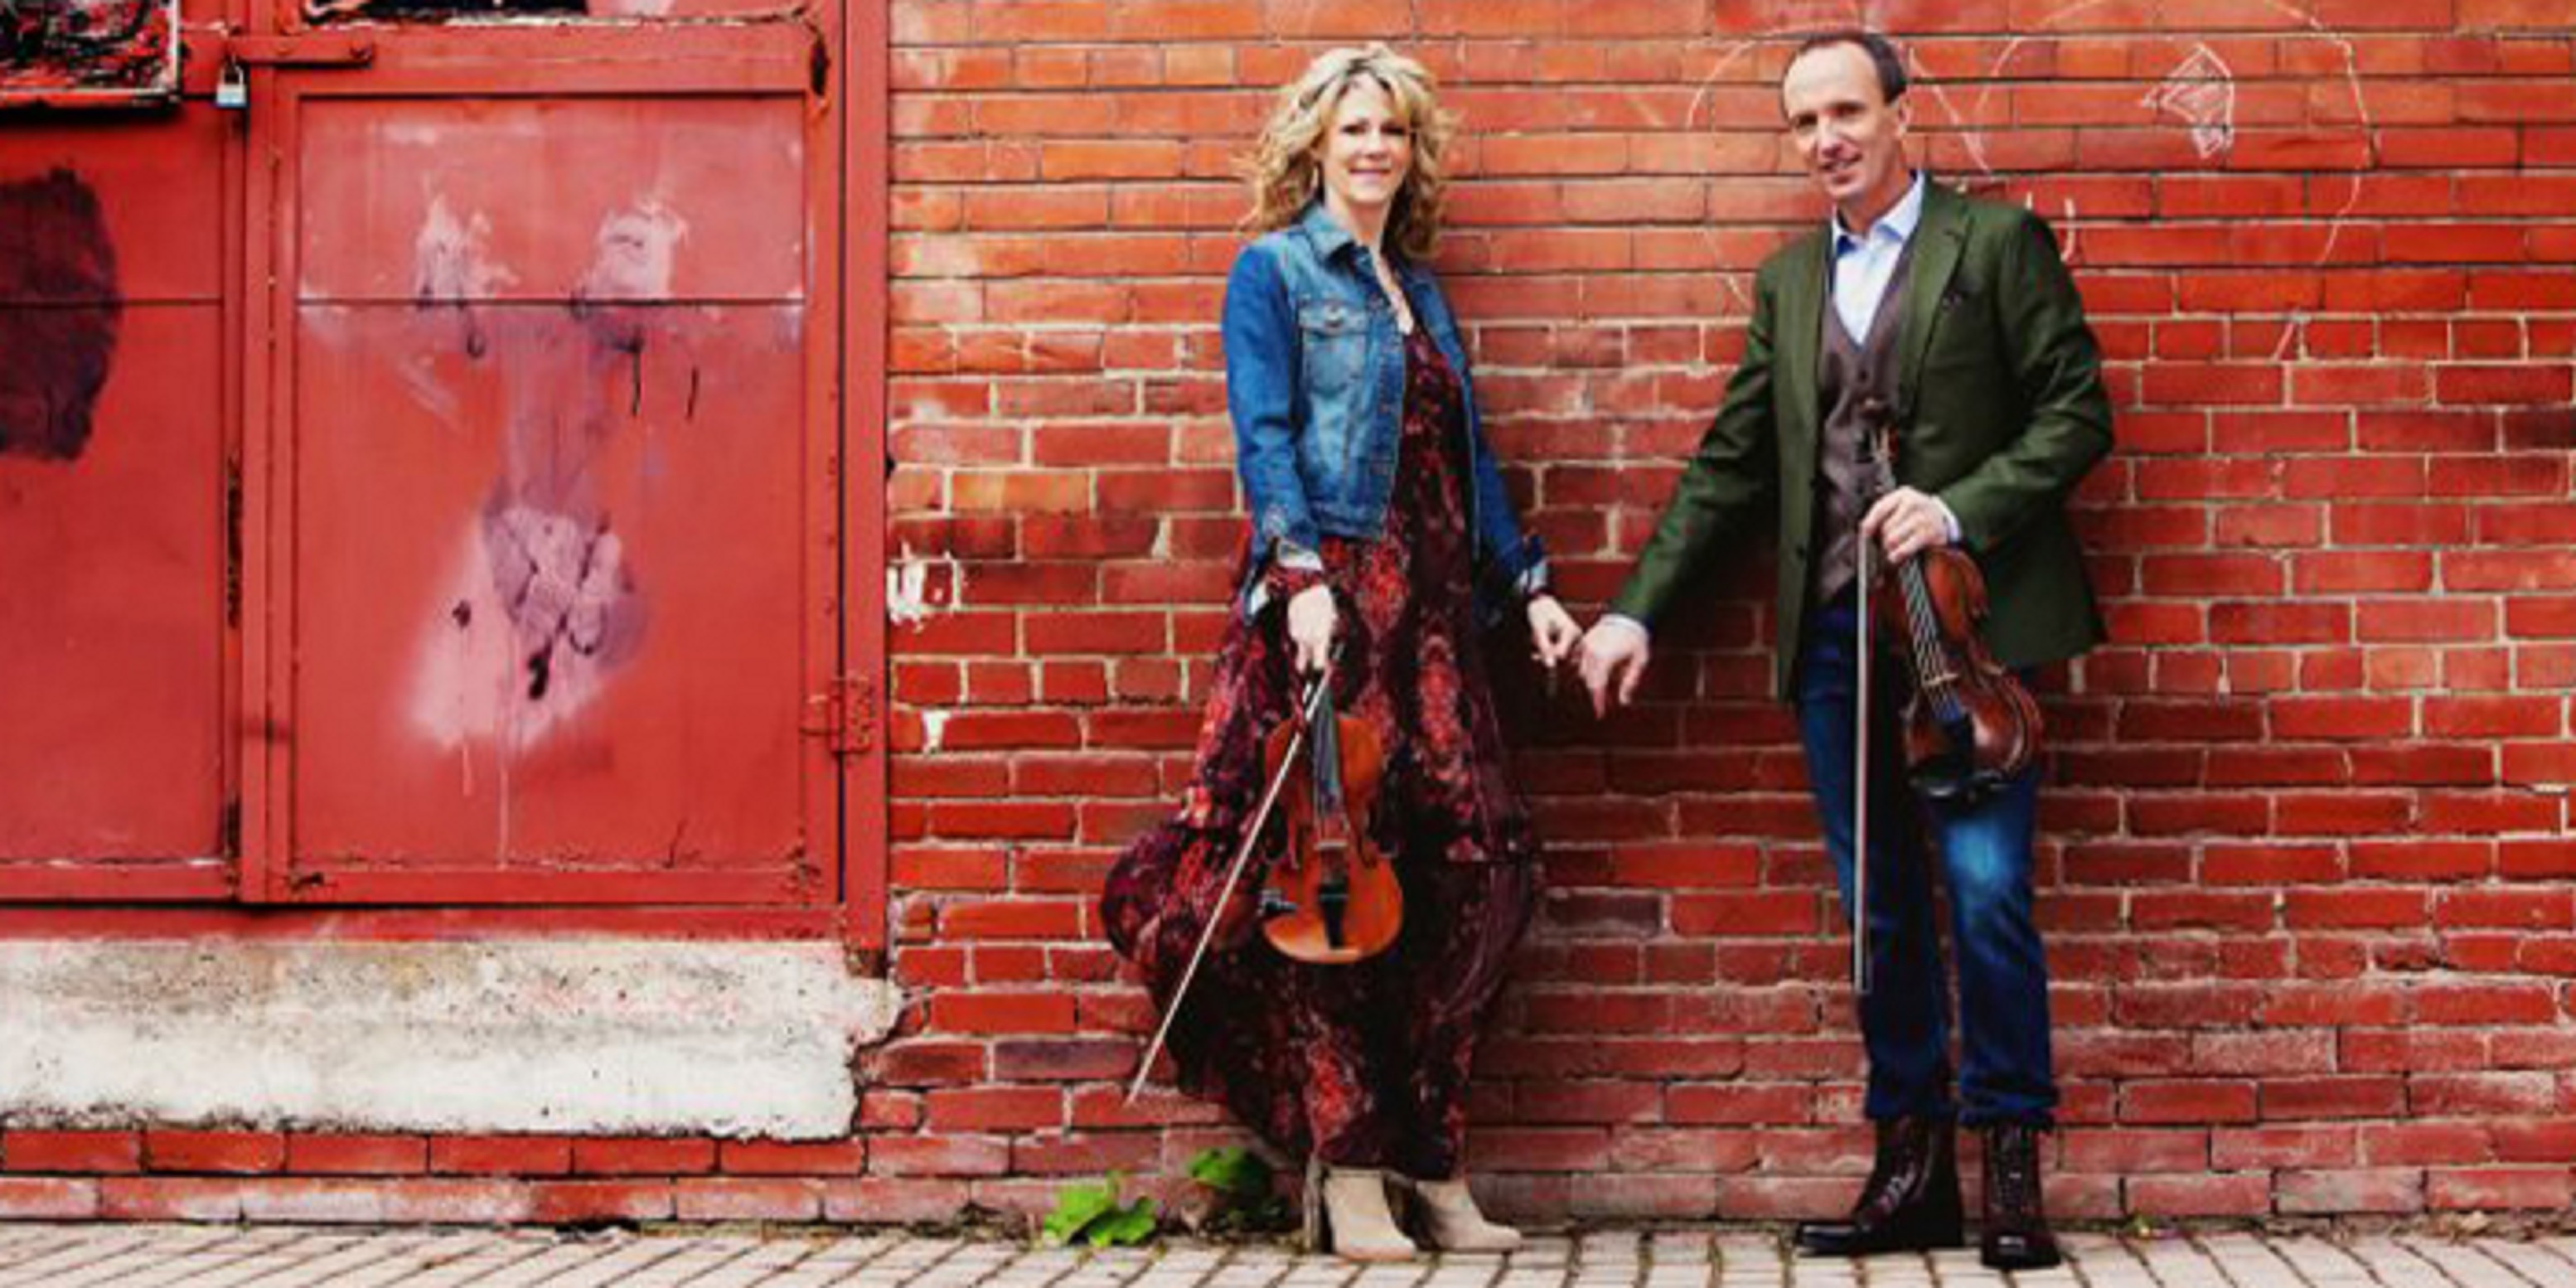 Music Worcester Welcomes Natalie MacMaster & Donnell Leahy to Hanover Theatre March 9th